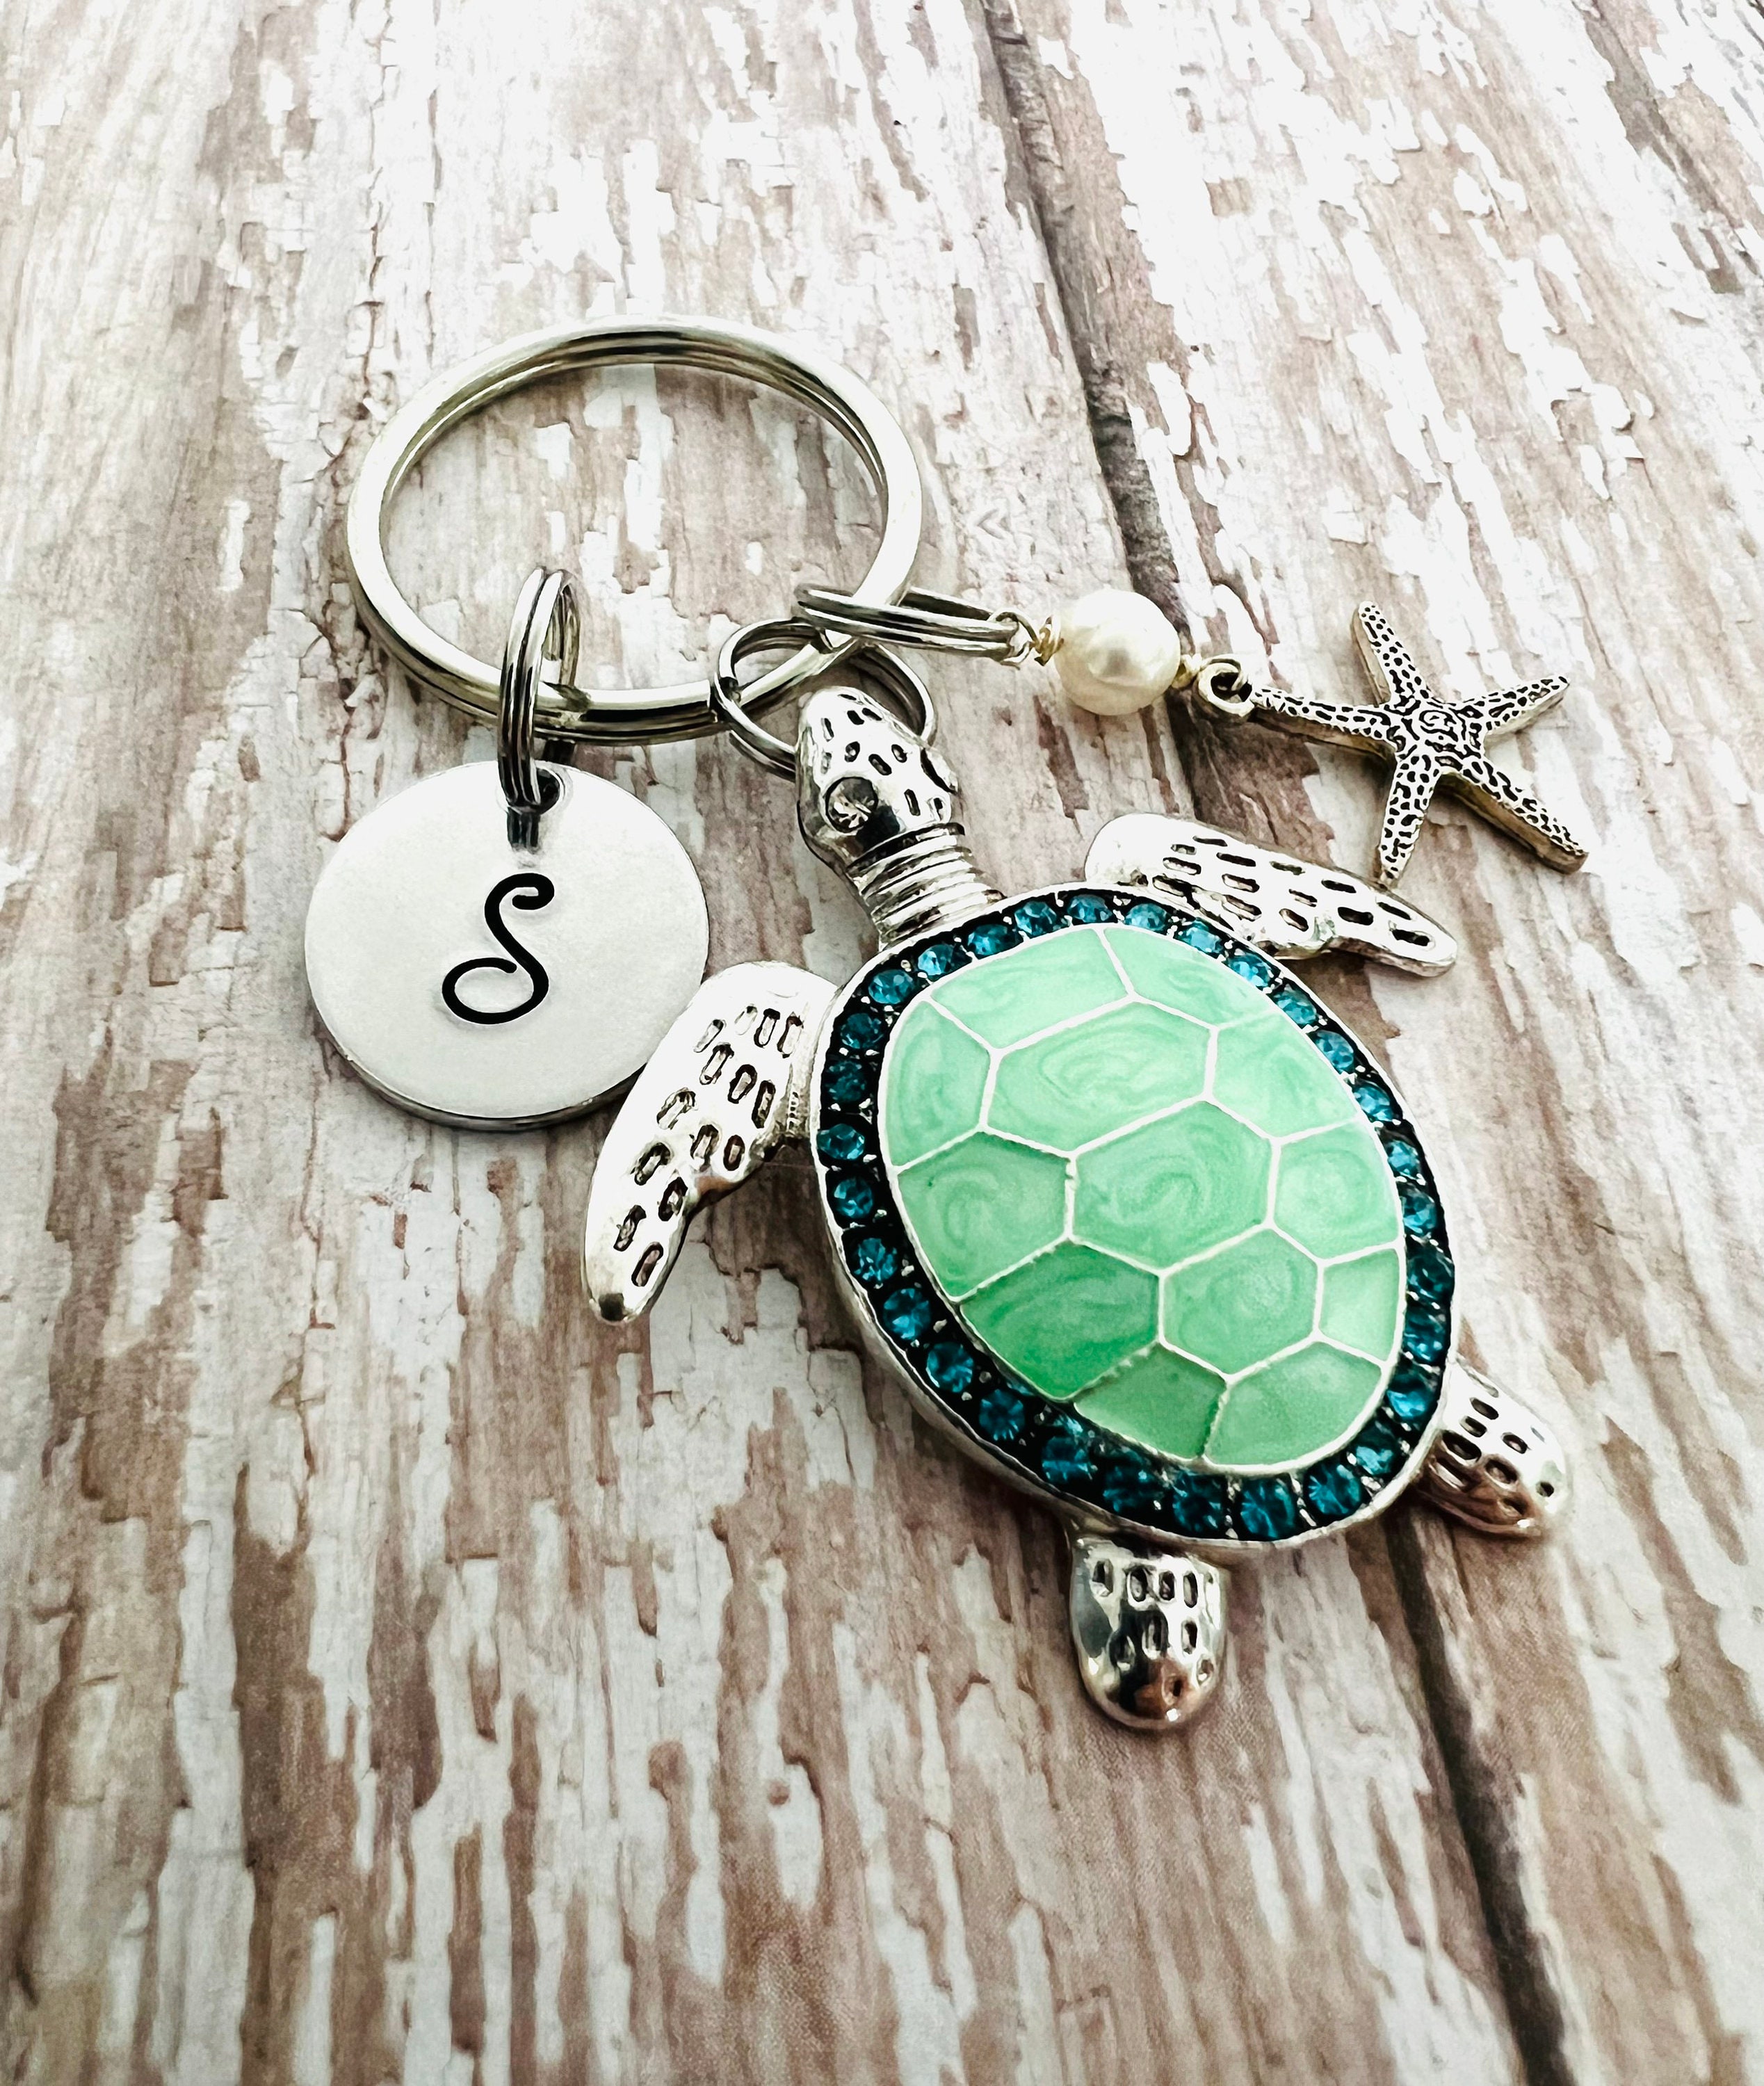 Big Blue by Roland Turtle Keychain for Men and Women- Sea Turtle Key Fob, Gift for Turtle lovers, Cute Turtle Keyring, Sea Life Key Chain, Scuba Gifts